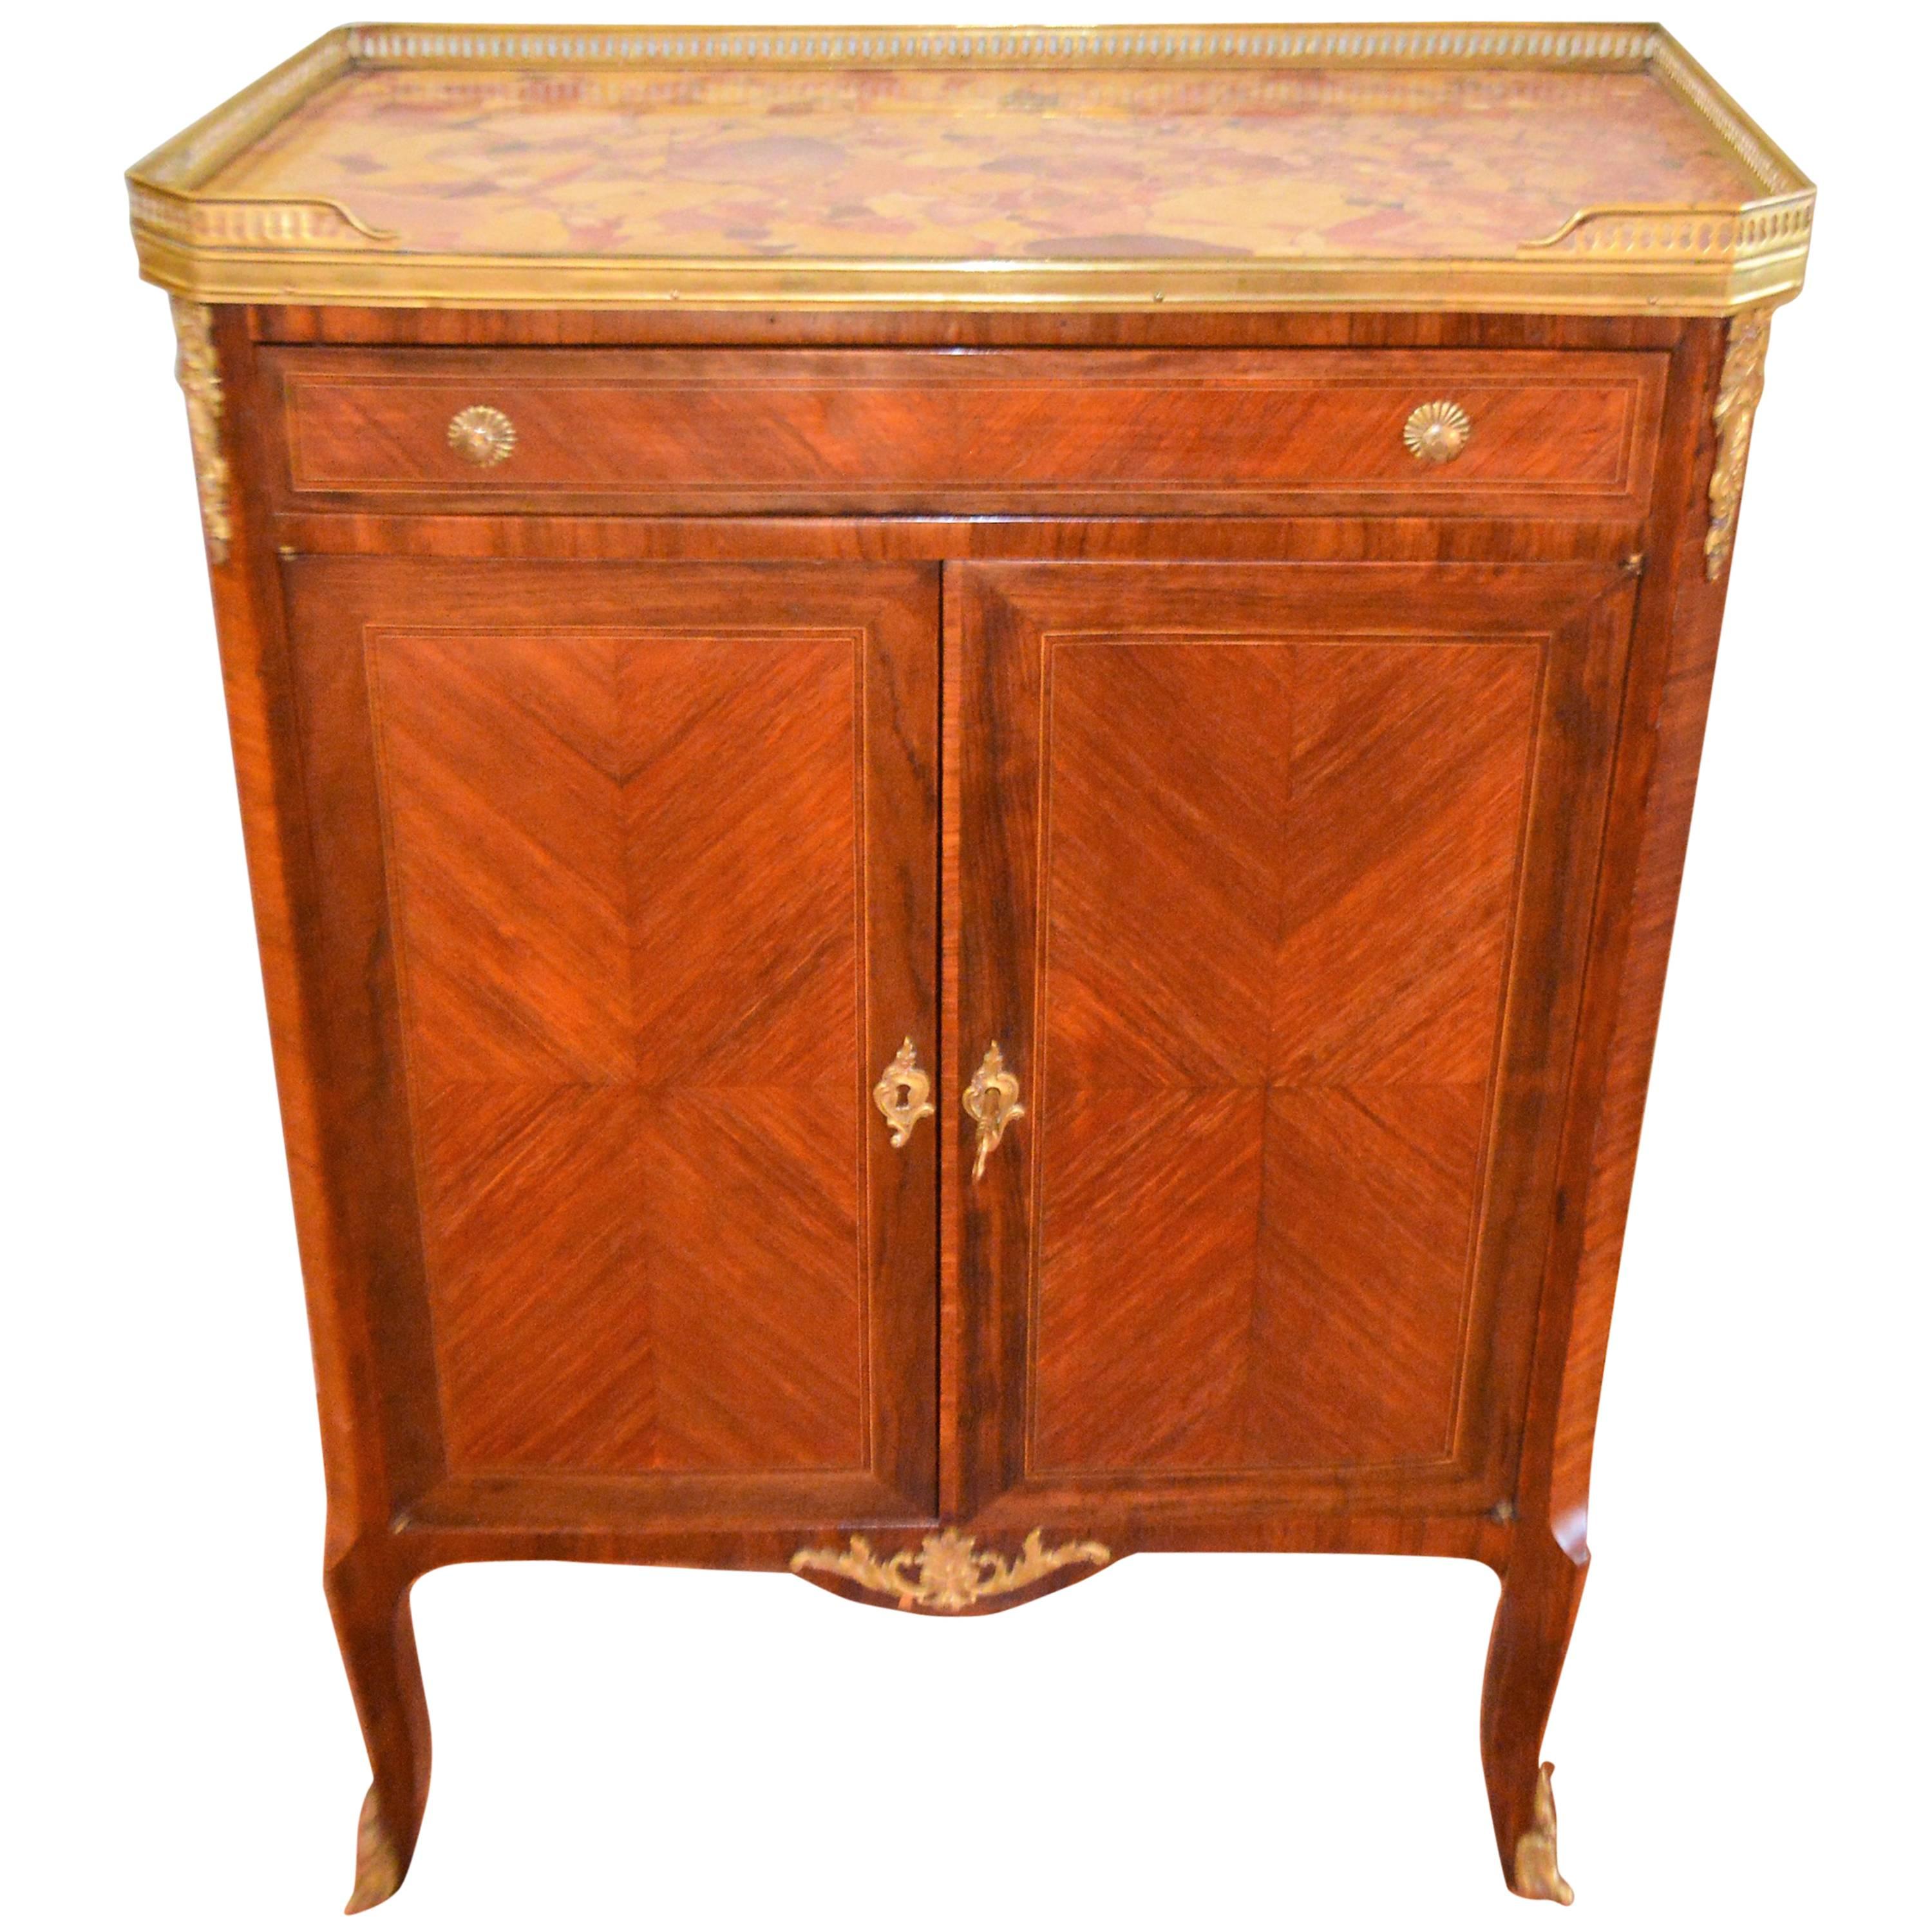 Transitional Style Inlay Two-Door Cabinet with Marble Top